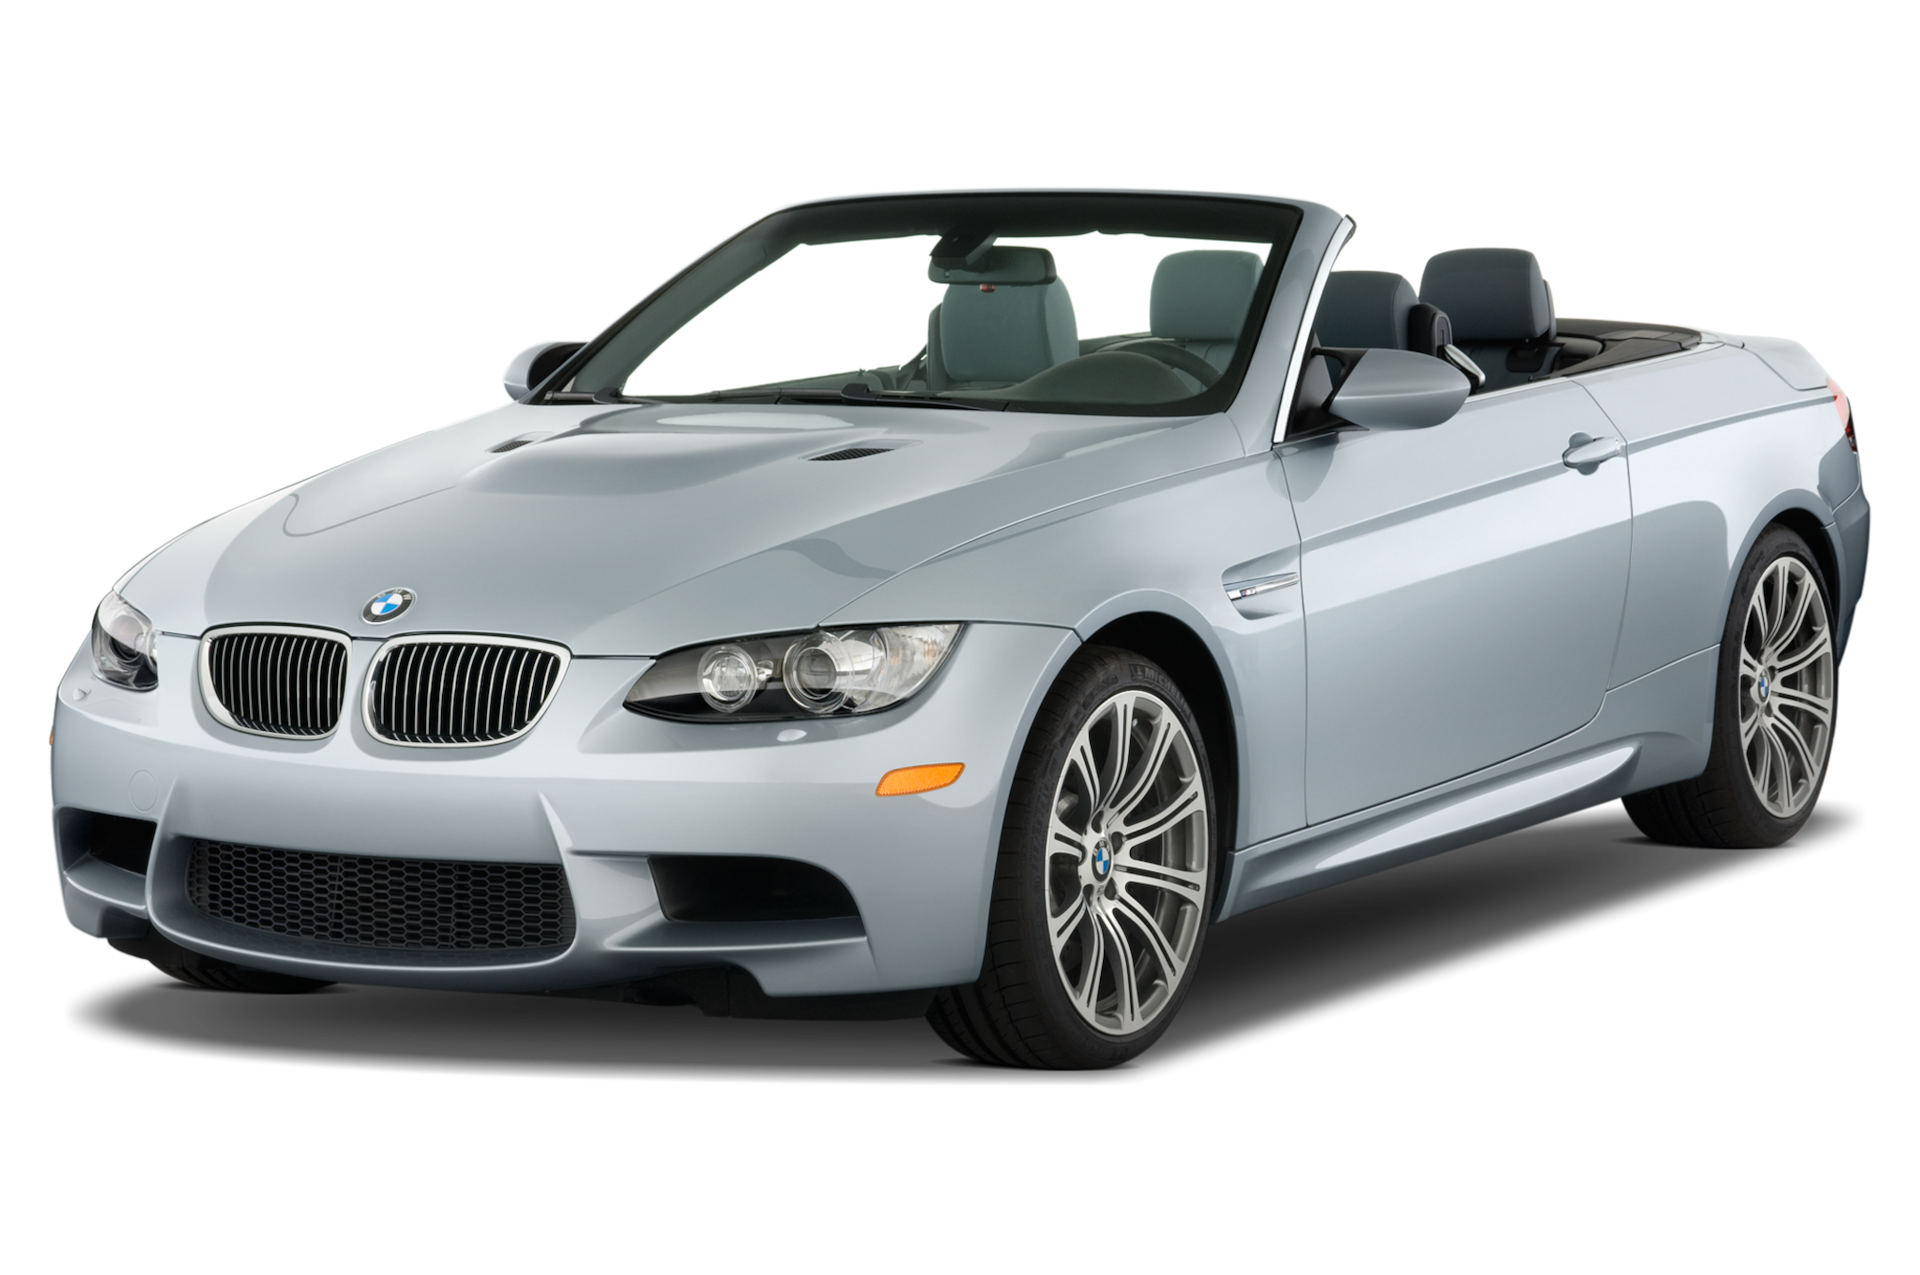 2012 BMW M3 Prices, Reviews, and Photos - MotorTrend